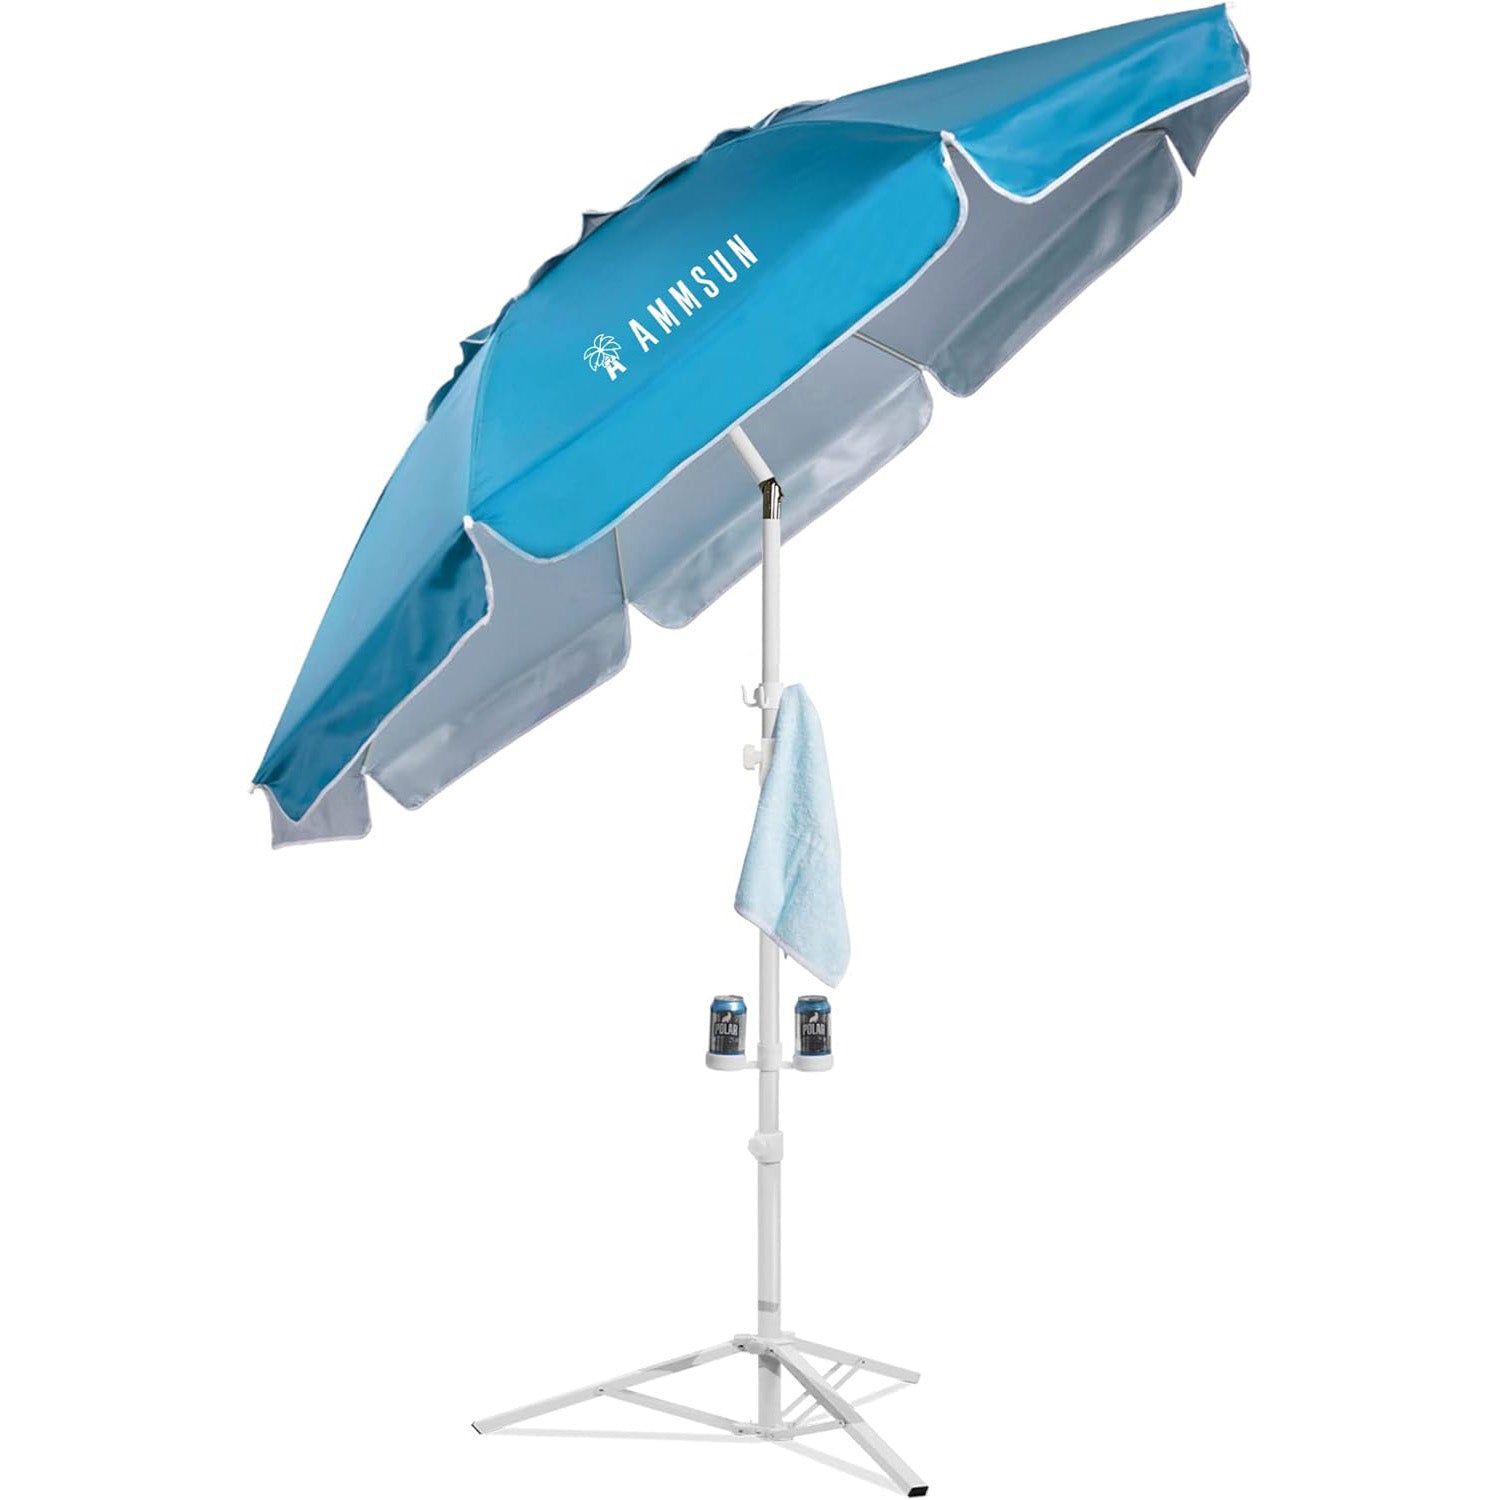 AMMSUN 6.5ft Lightweight Portable Sports Umbrella with Stand Sky Blue